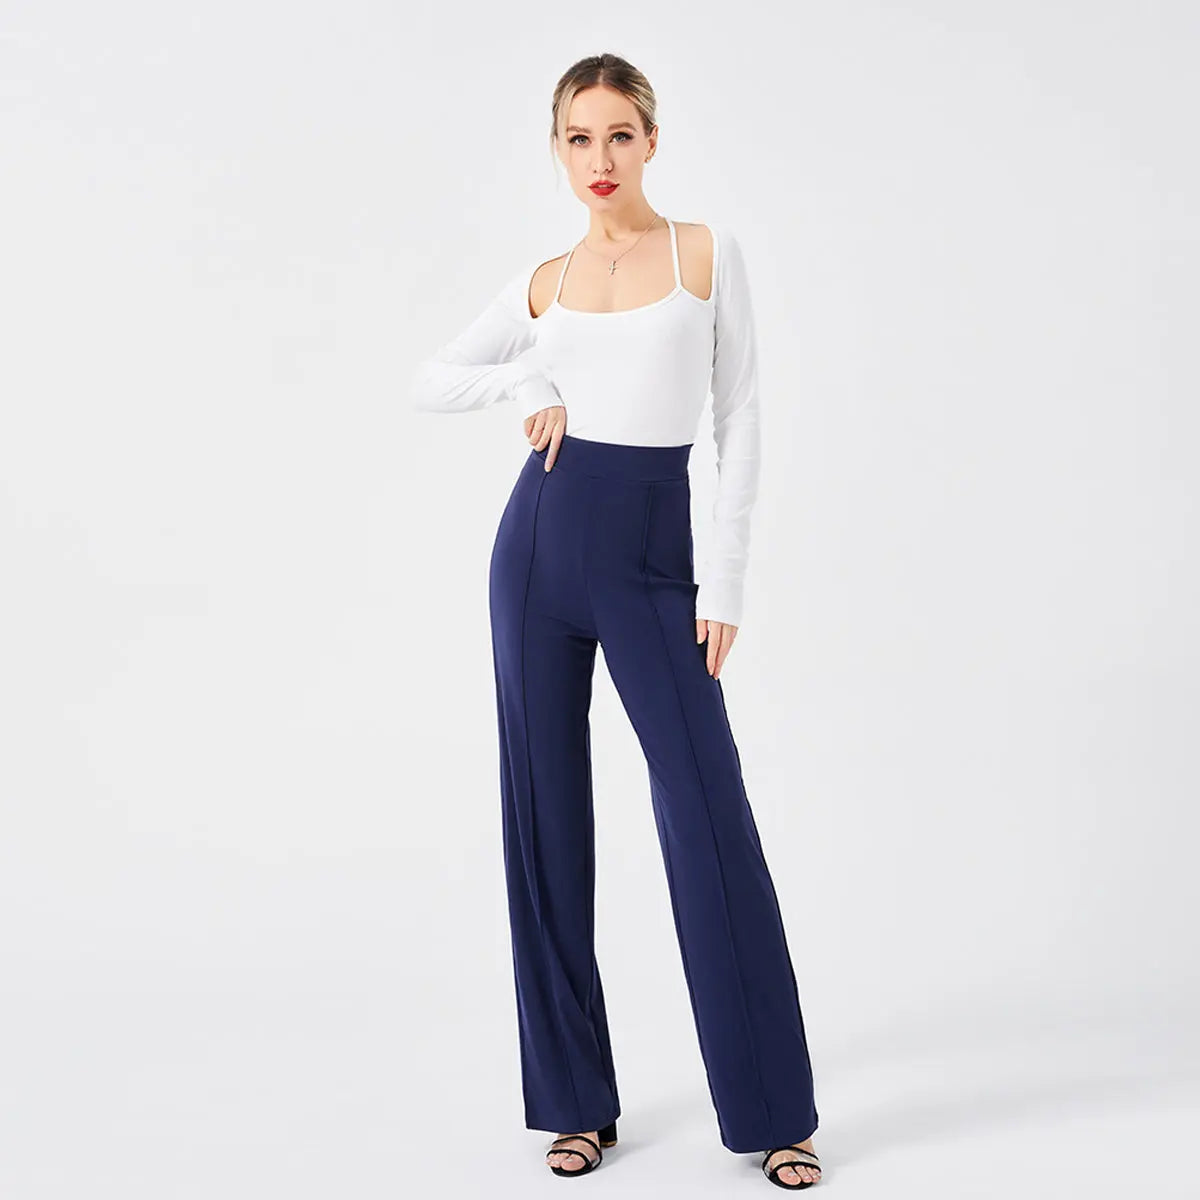 Solid Color Casual Pants Slim, High-waisted Bell Bottoms cj